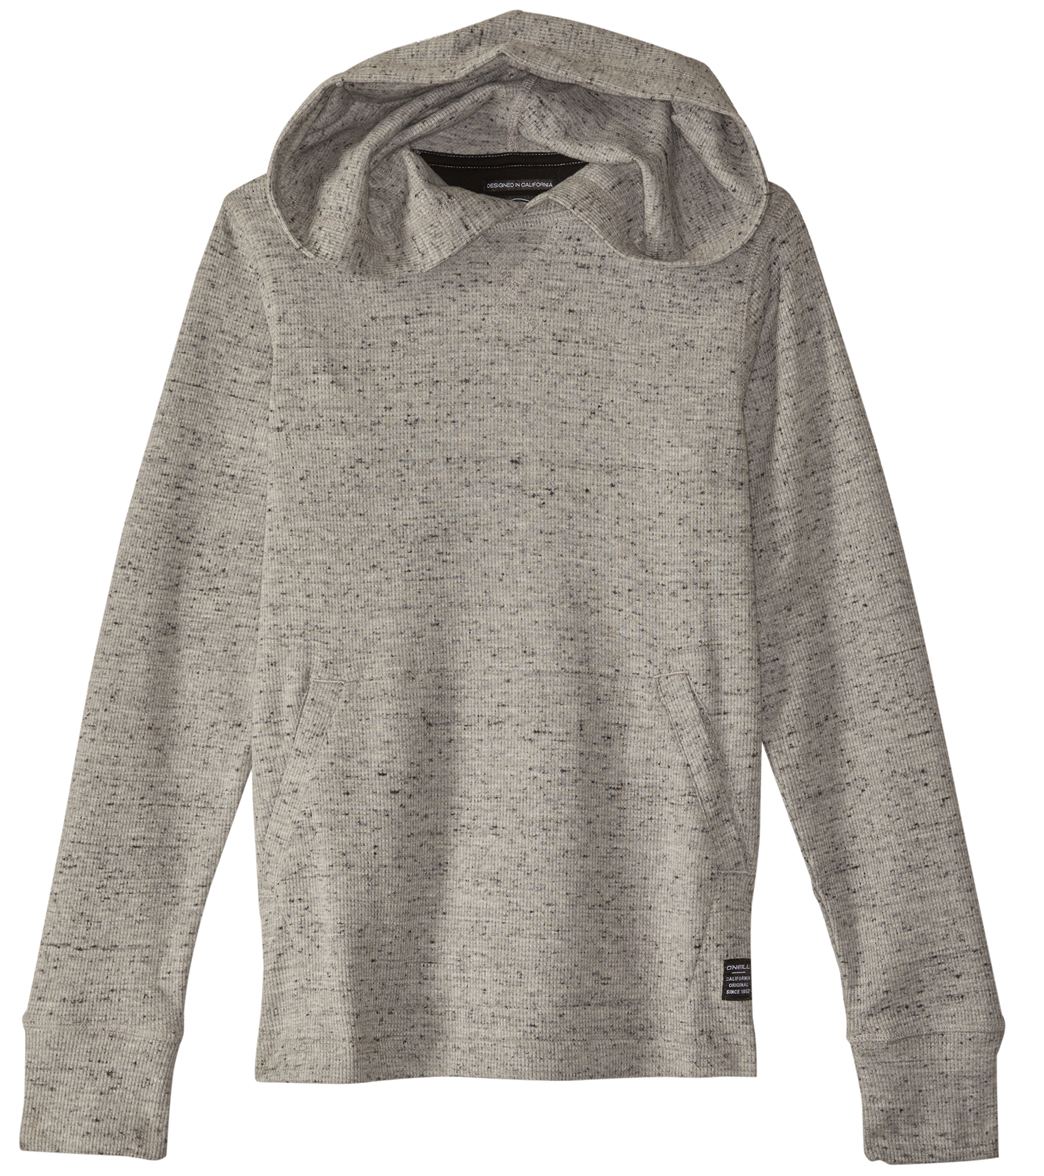 O'neill Boys' Boldin Hooded Pullover Big Kid - Light Grey Small Cotton/Polyester - Swimoutlet.com